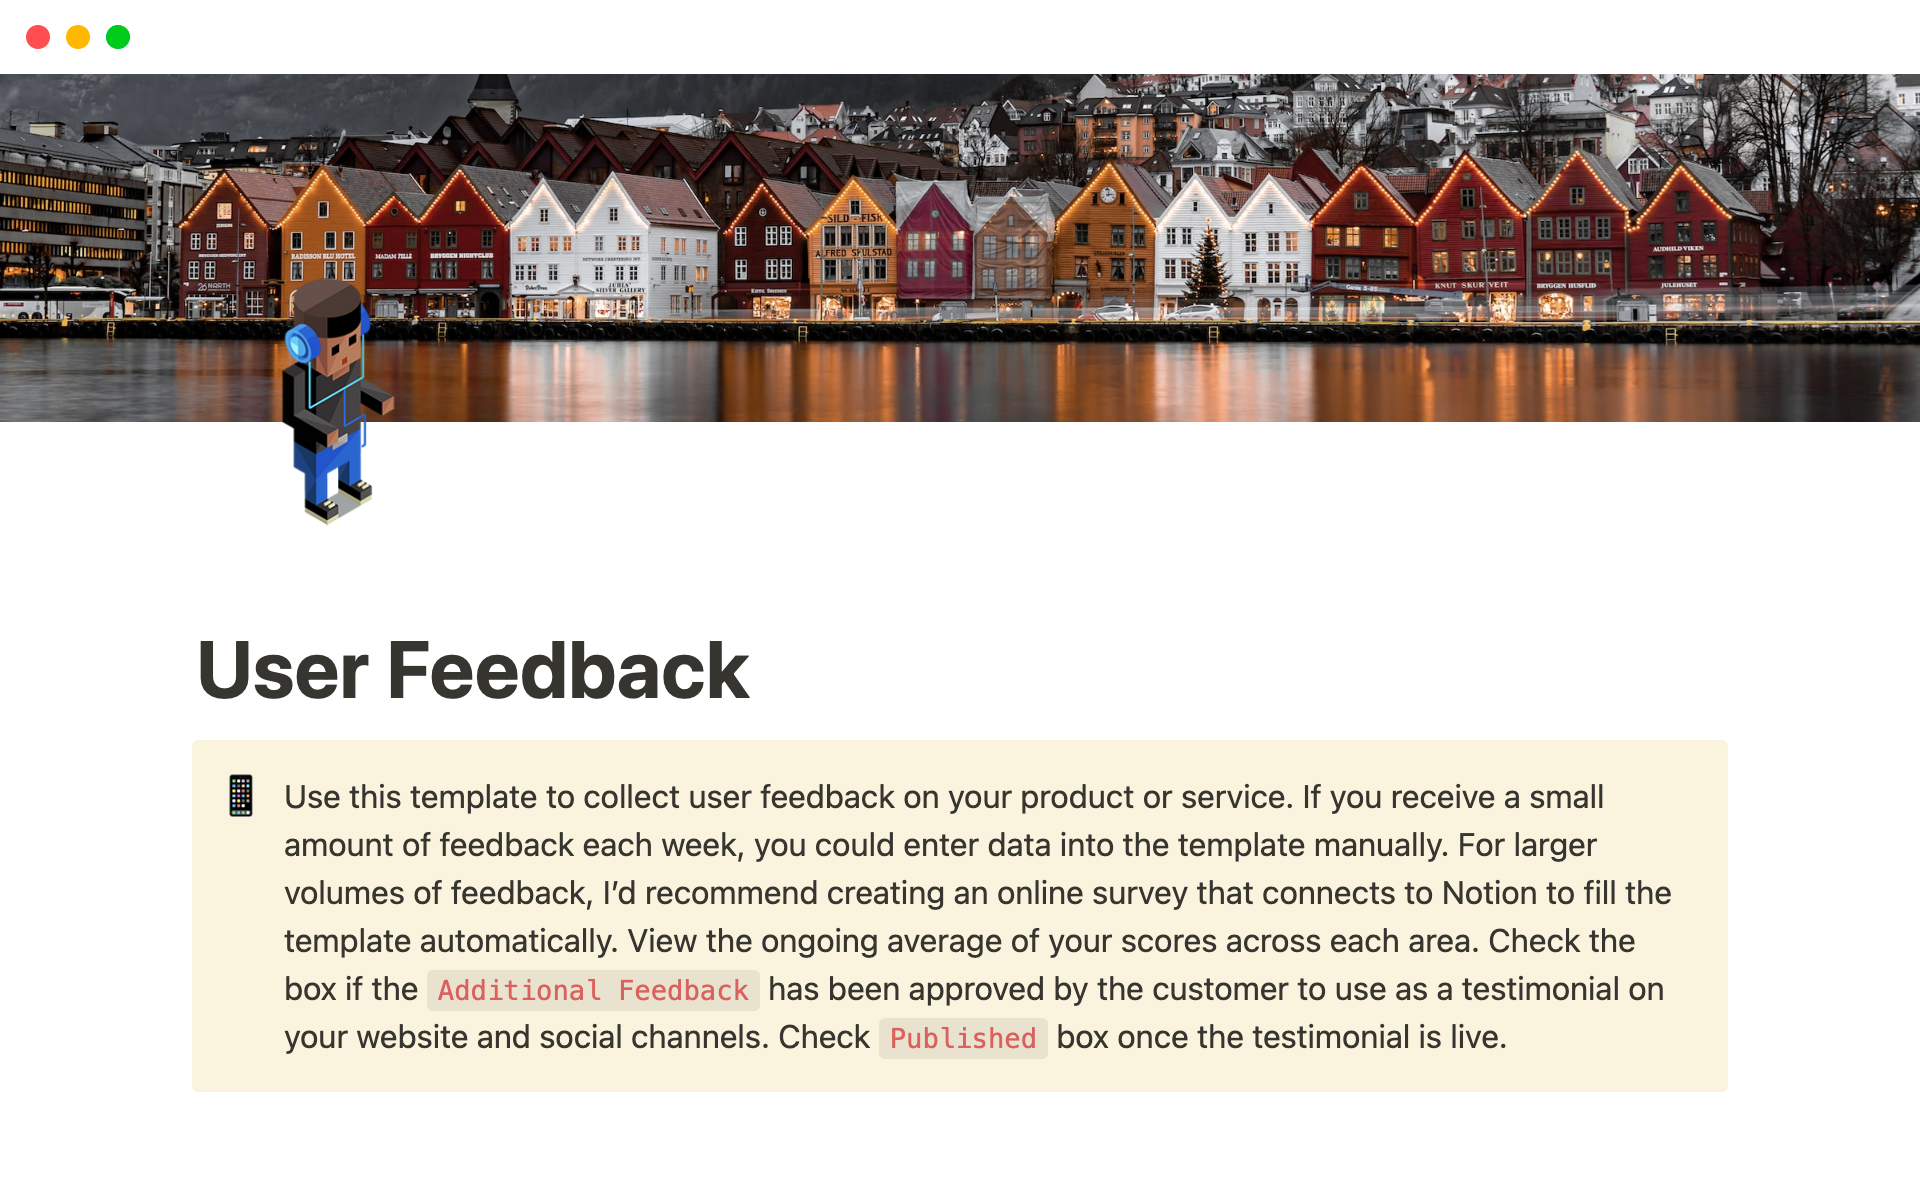 This template can be used to gather feedback from customers who have interacted with your business, product or service and evaluate their satisfaction.